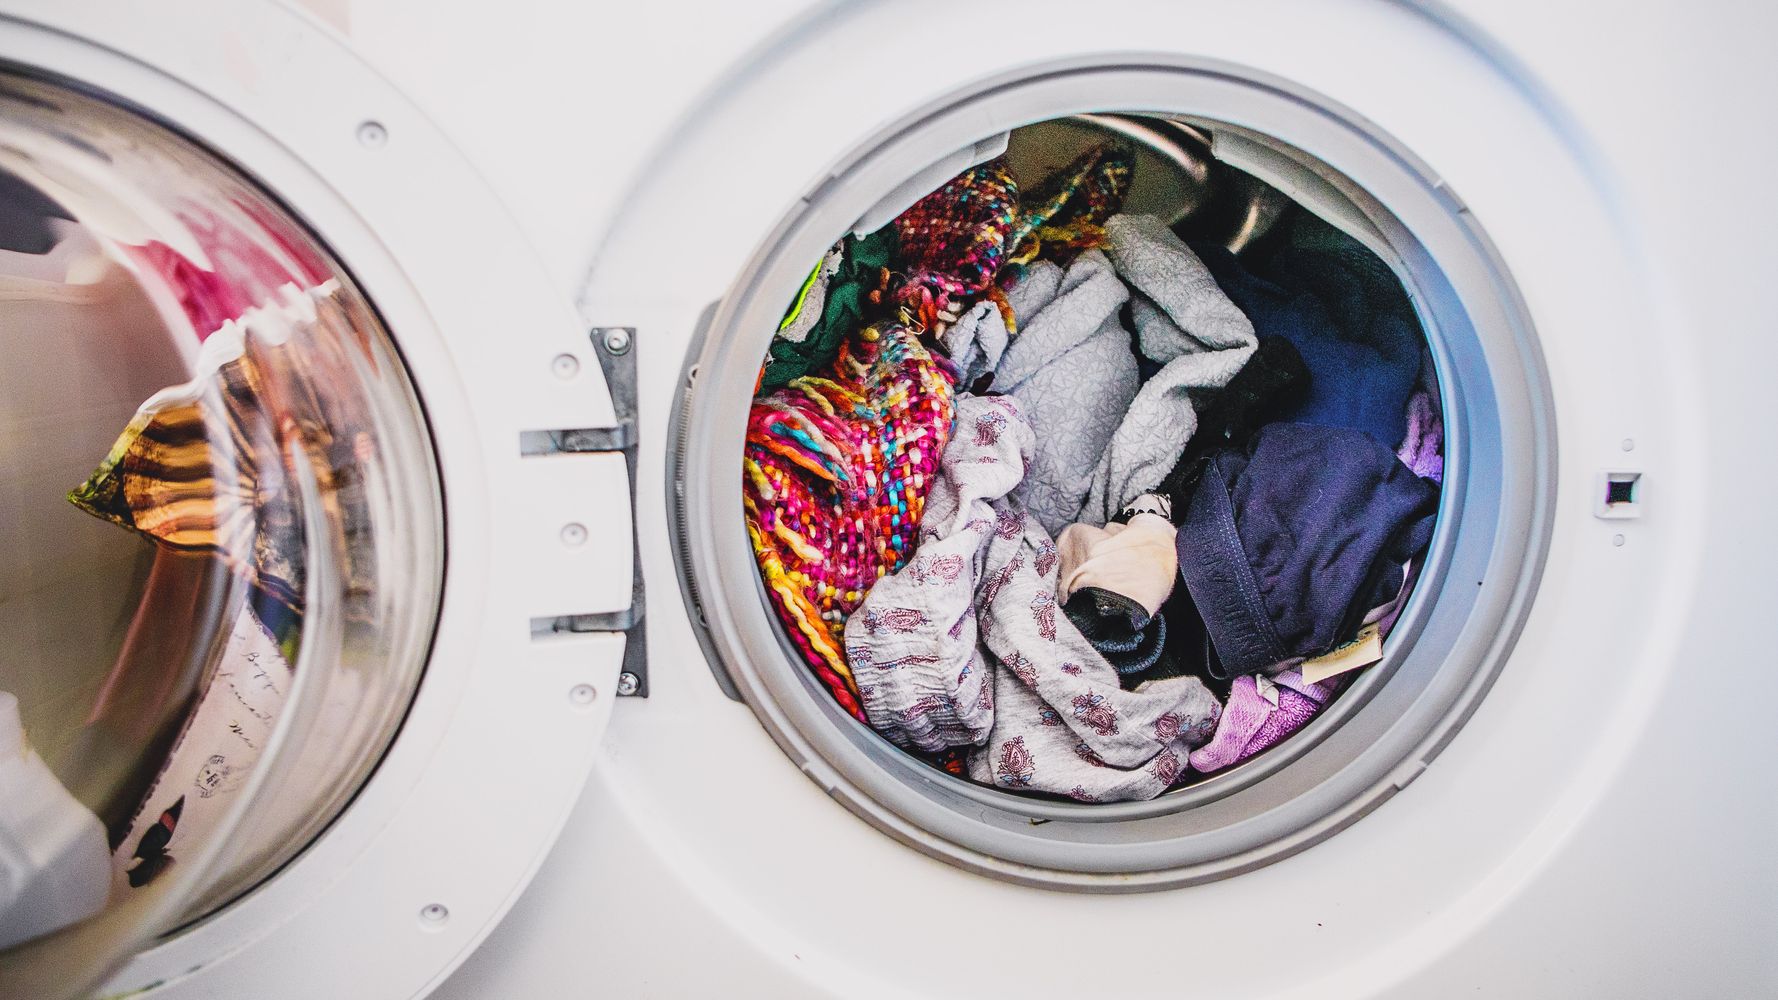 Vicious cycle: delicate wash releases more plastic microfibres